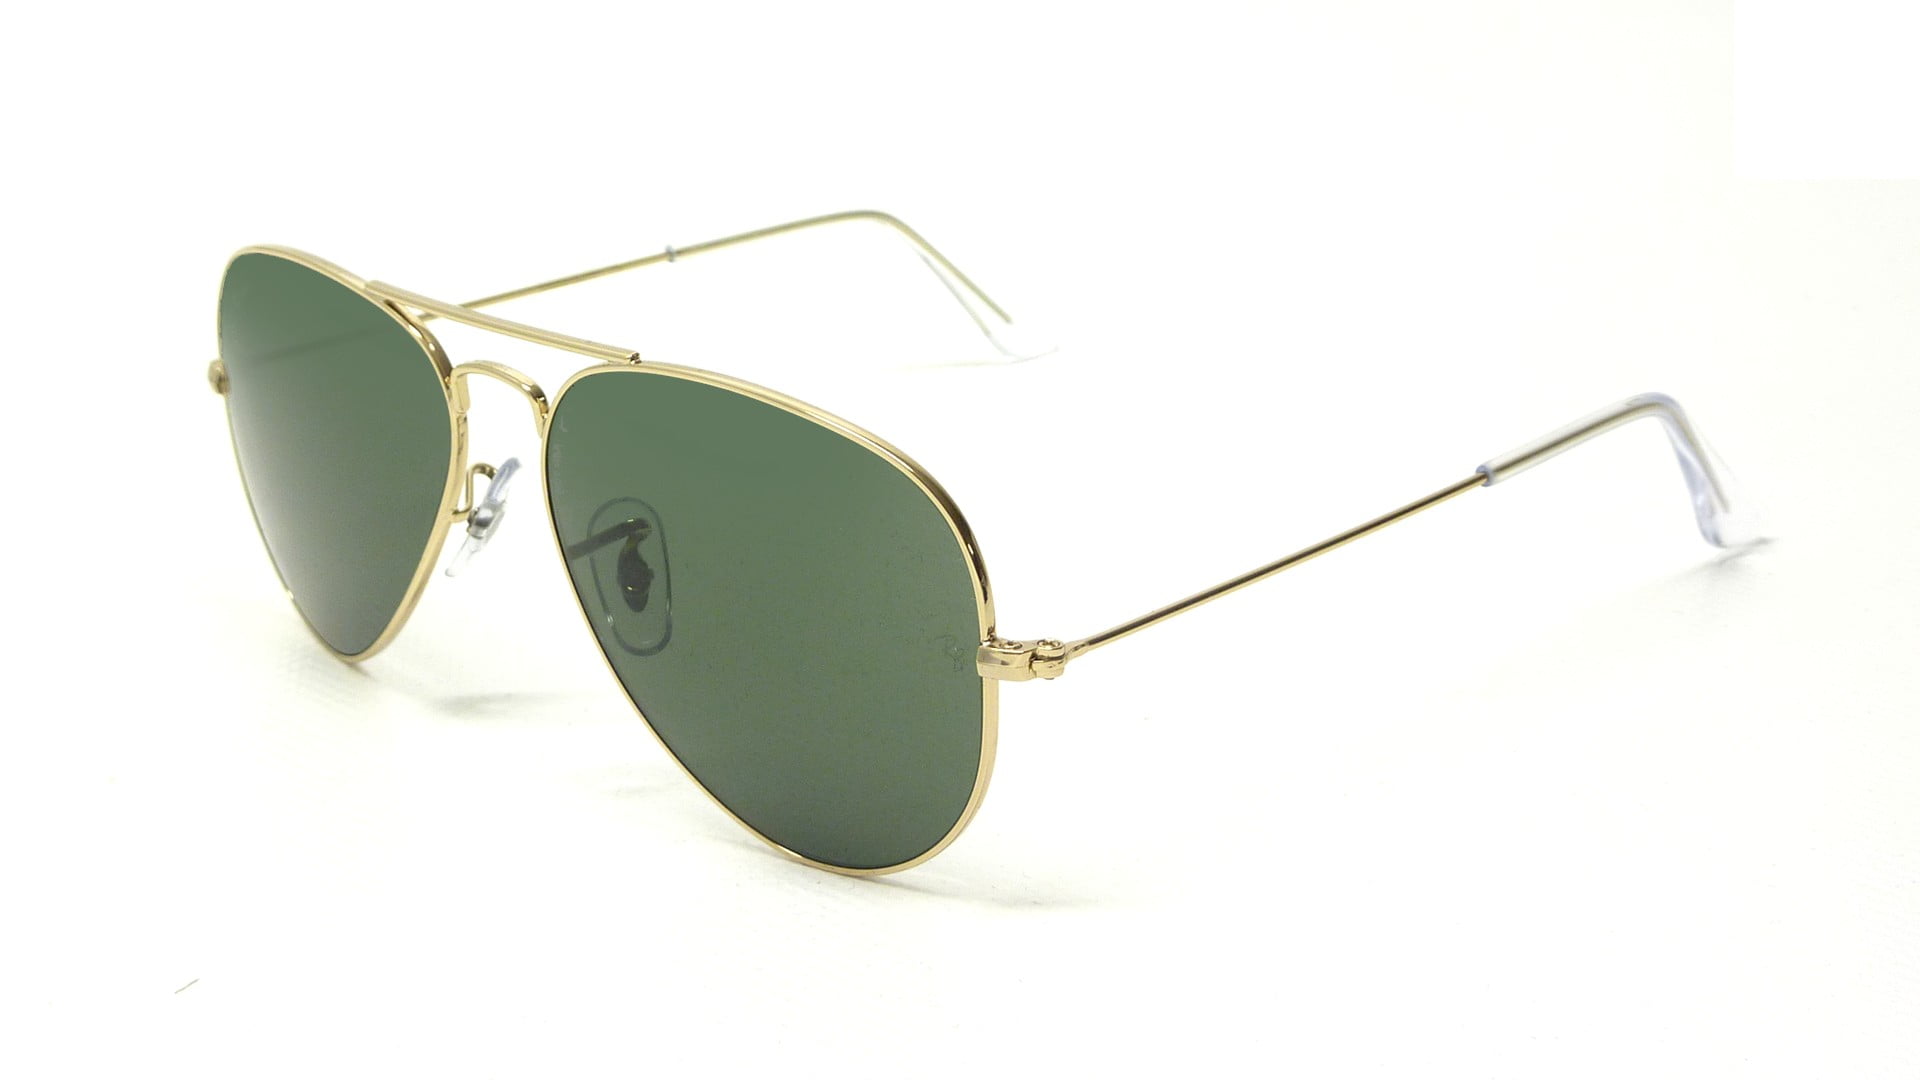 Wrongdoing Wardrobe sum Ray-Ban 0RB3025 L0205 58 Gold/Grey Green Aviator Large Metal Icons  Sunglasses - Bundled Item with Cleaning Kit - Walmart.com